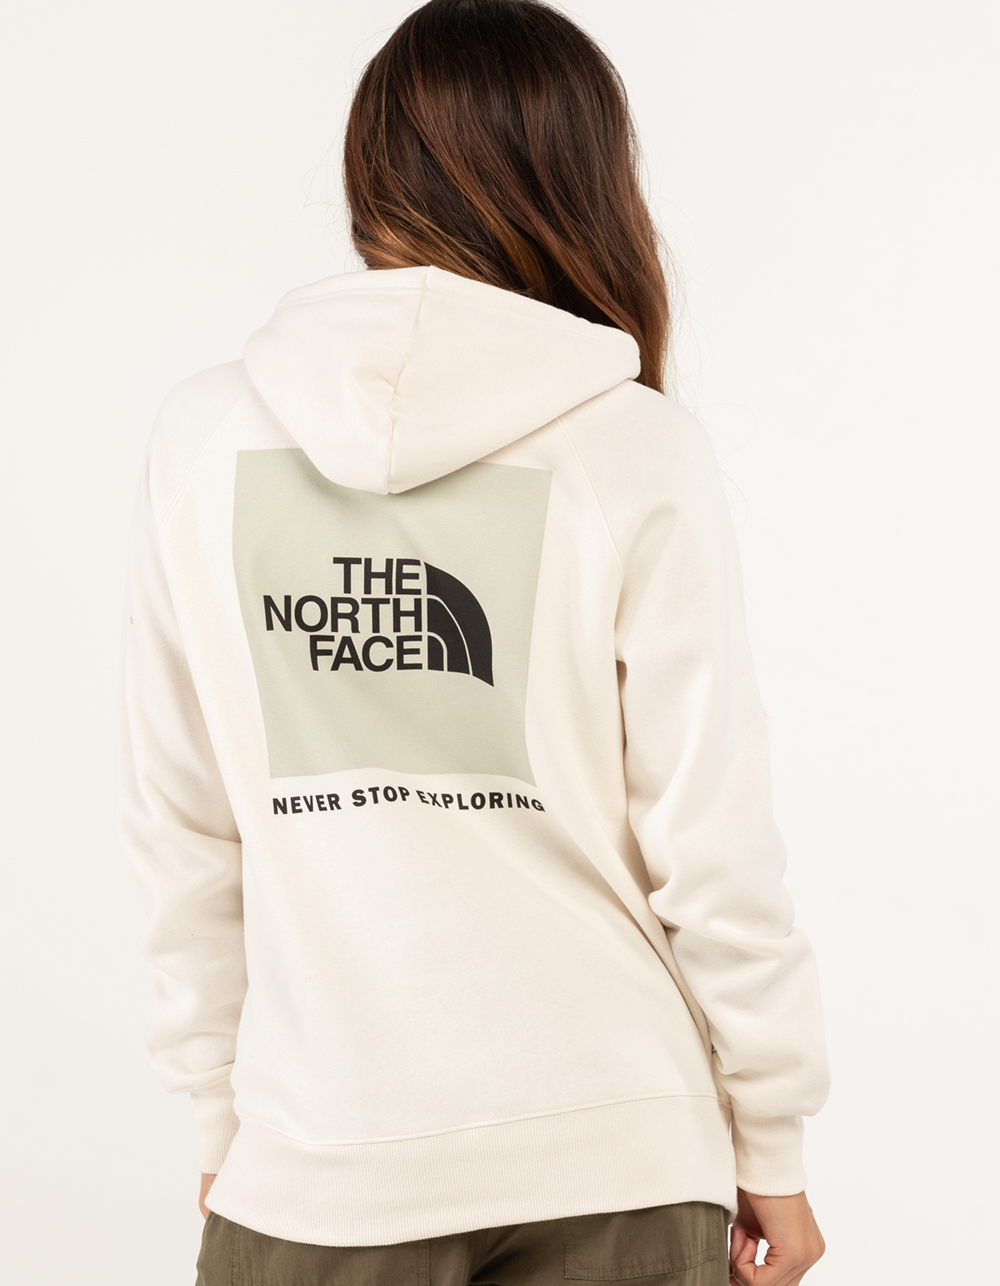 The North Face Women's Hoodies